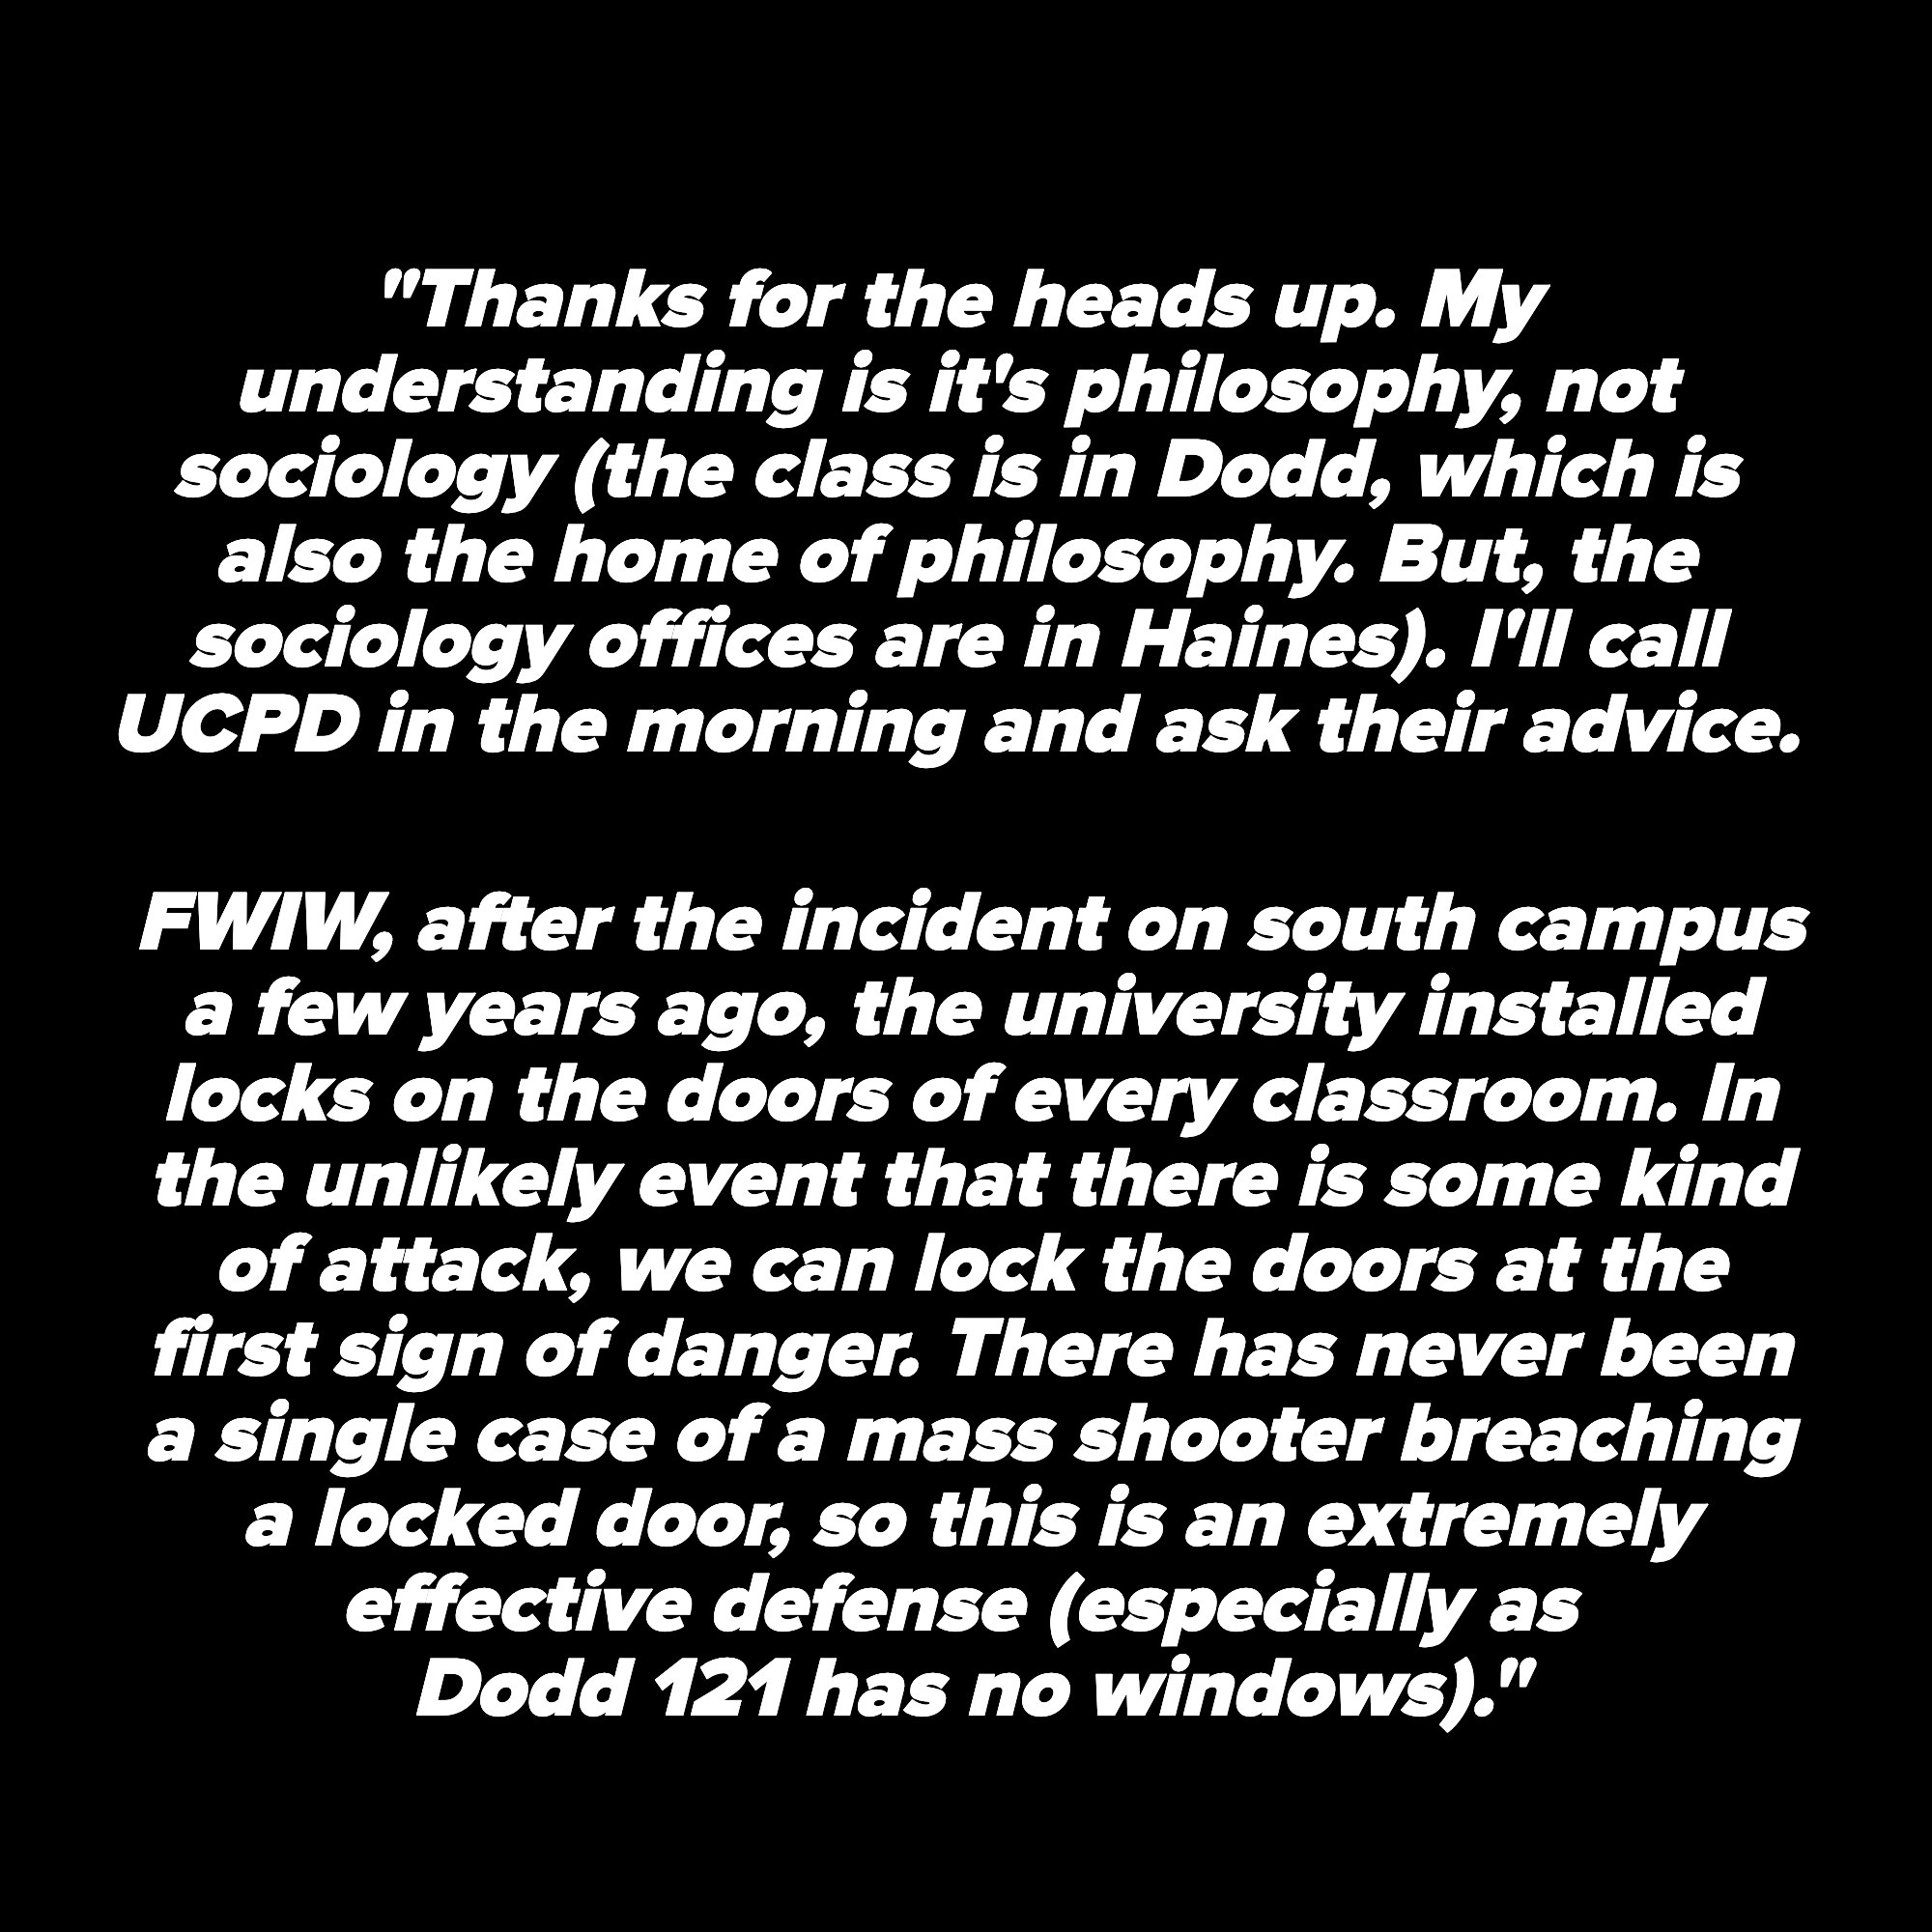 Email from professor that tells them to lock the doors if there happens to be a mass shooting